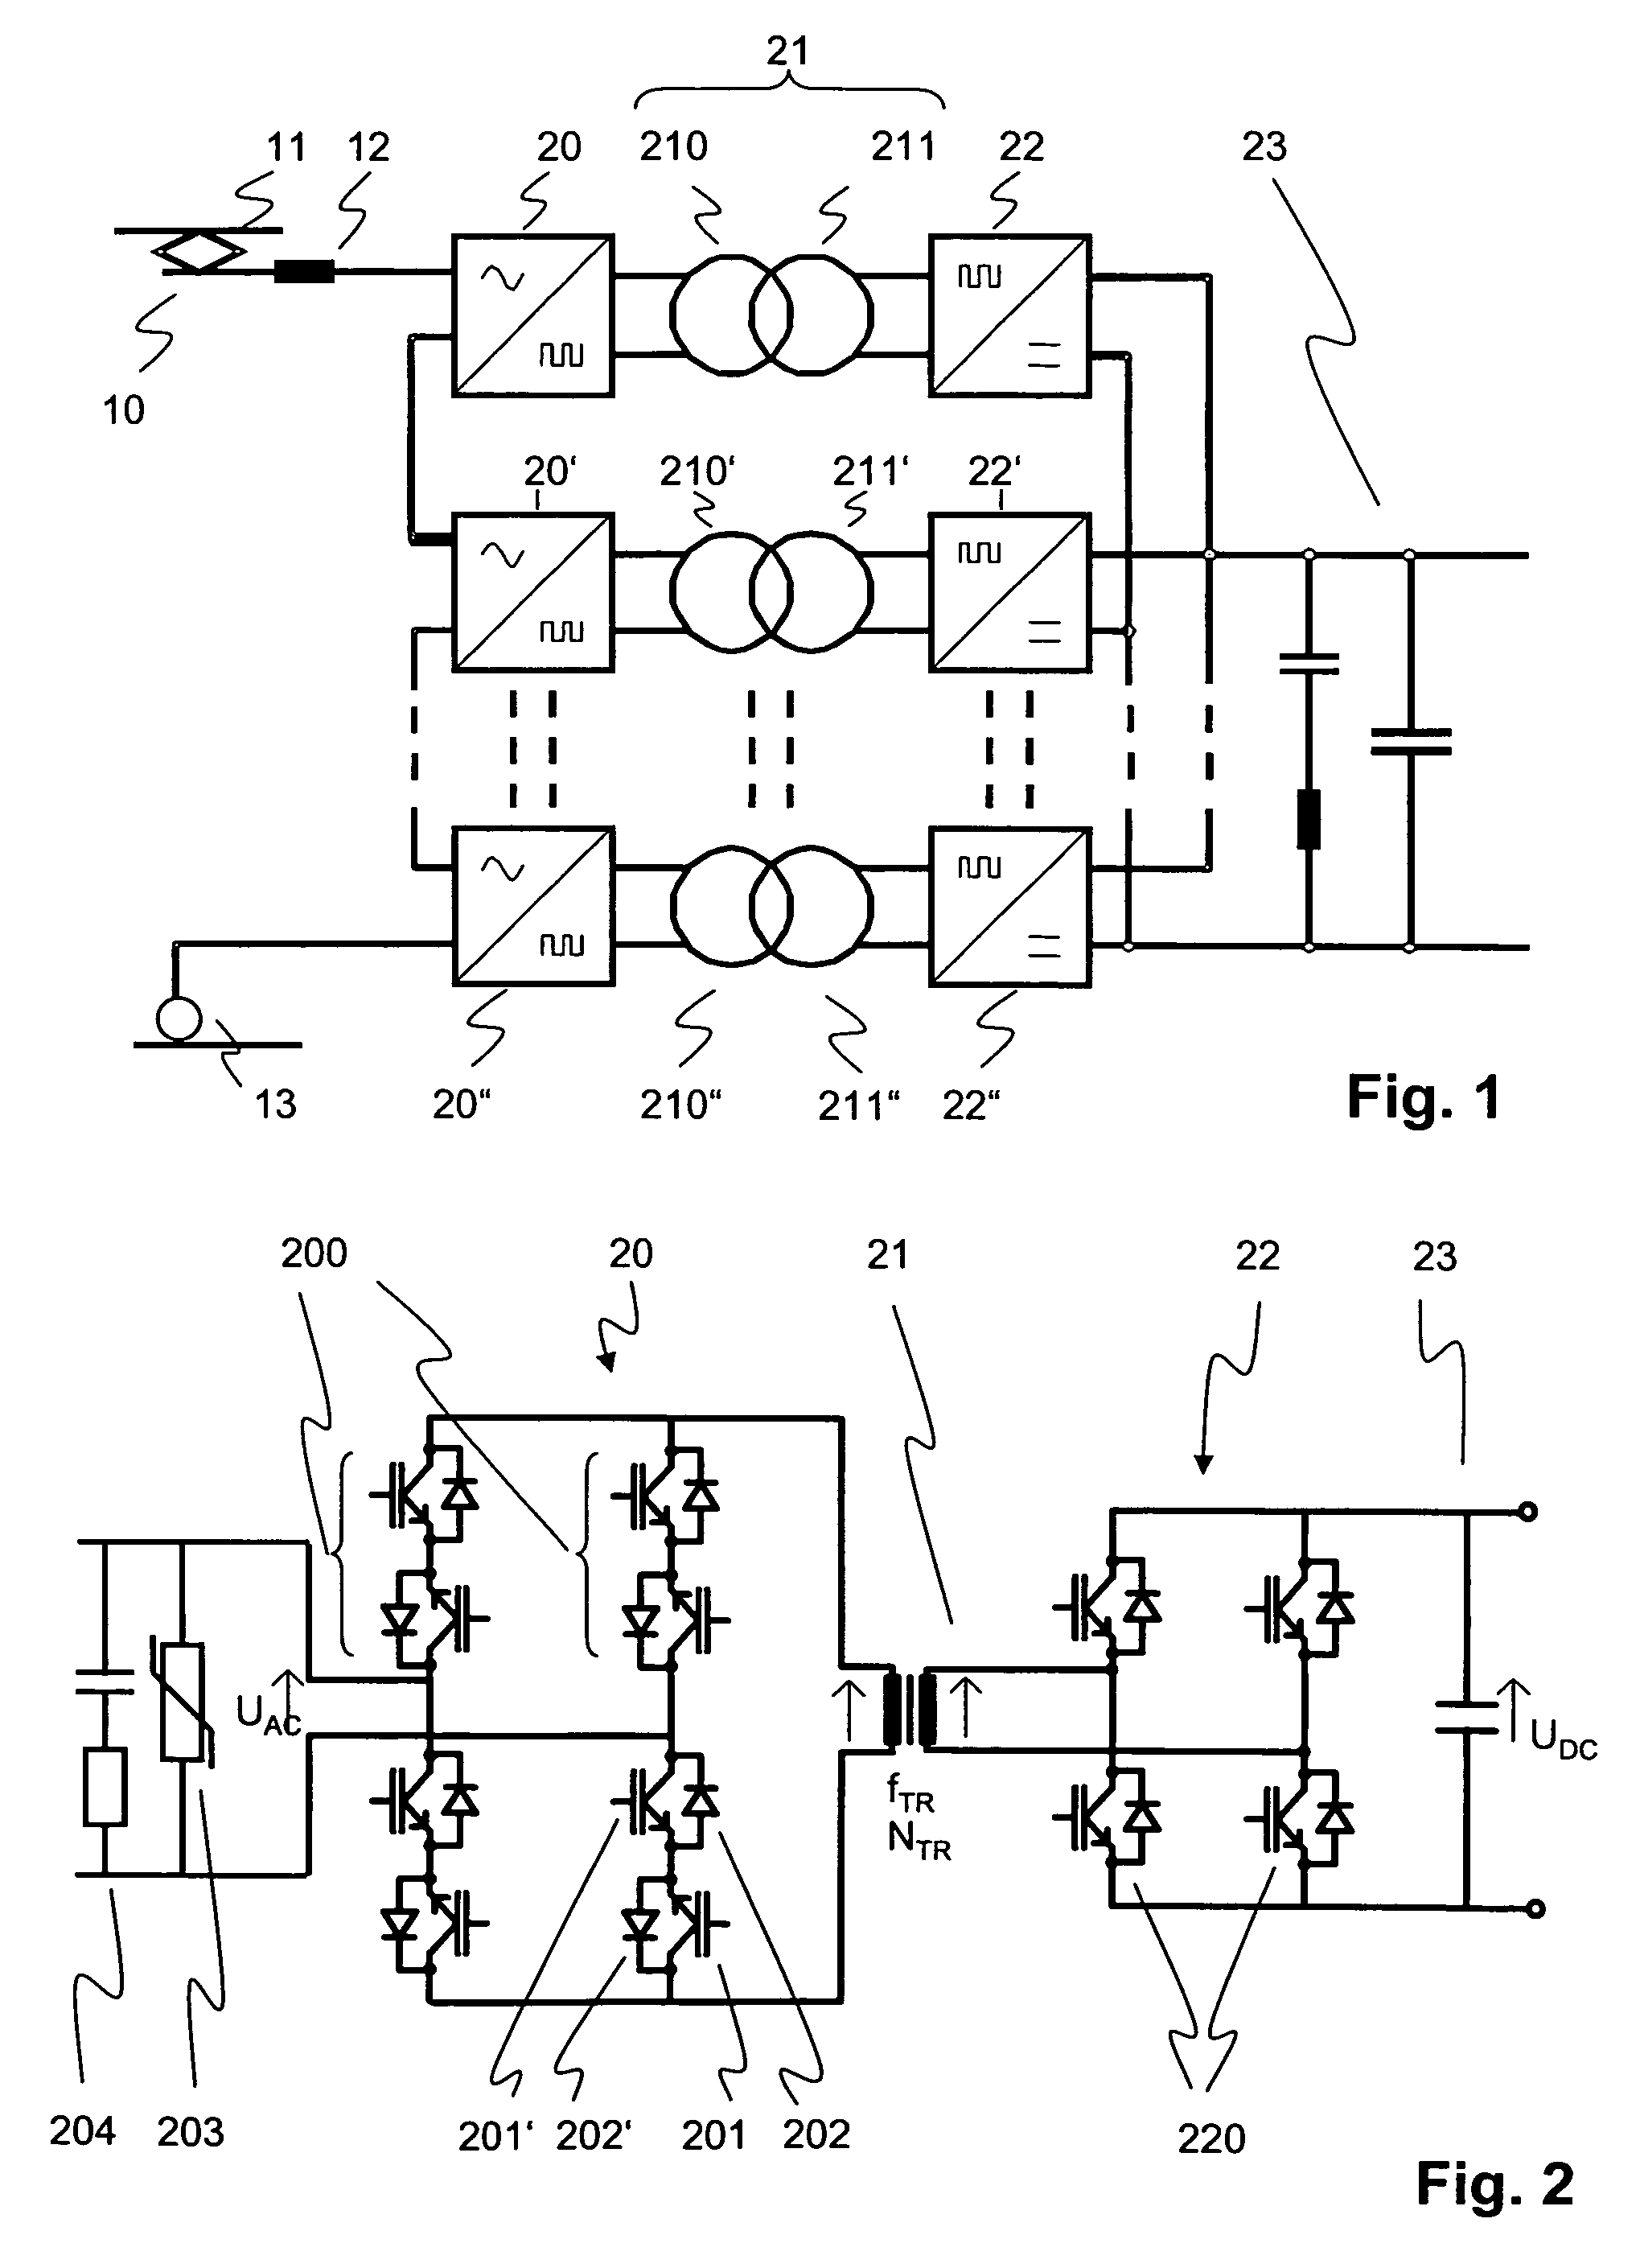 Multilevel AC/DC converter for traction applications